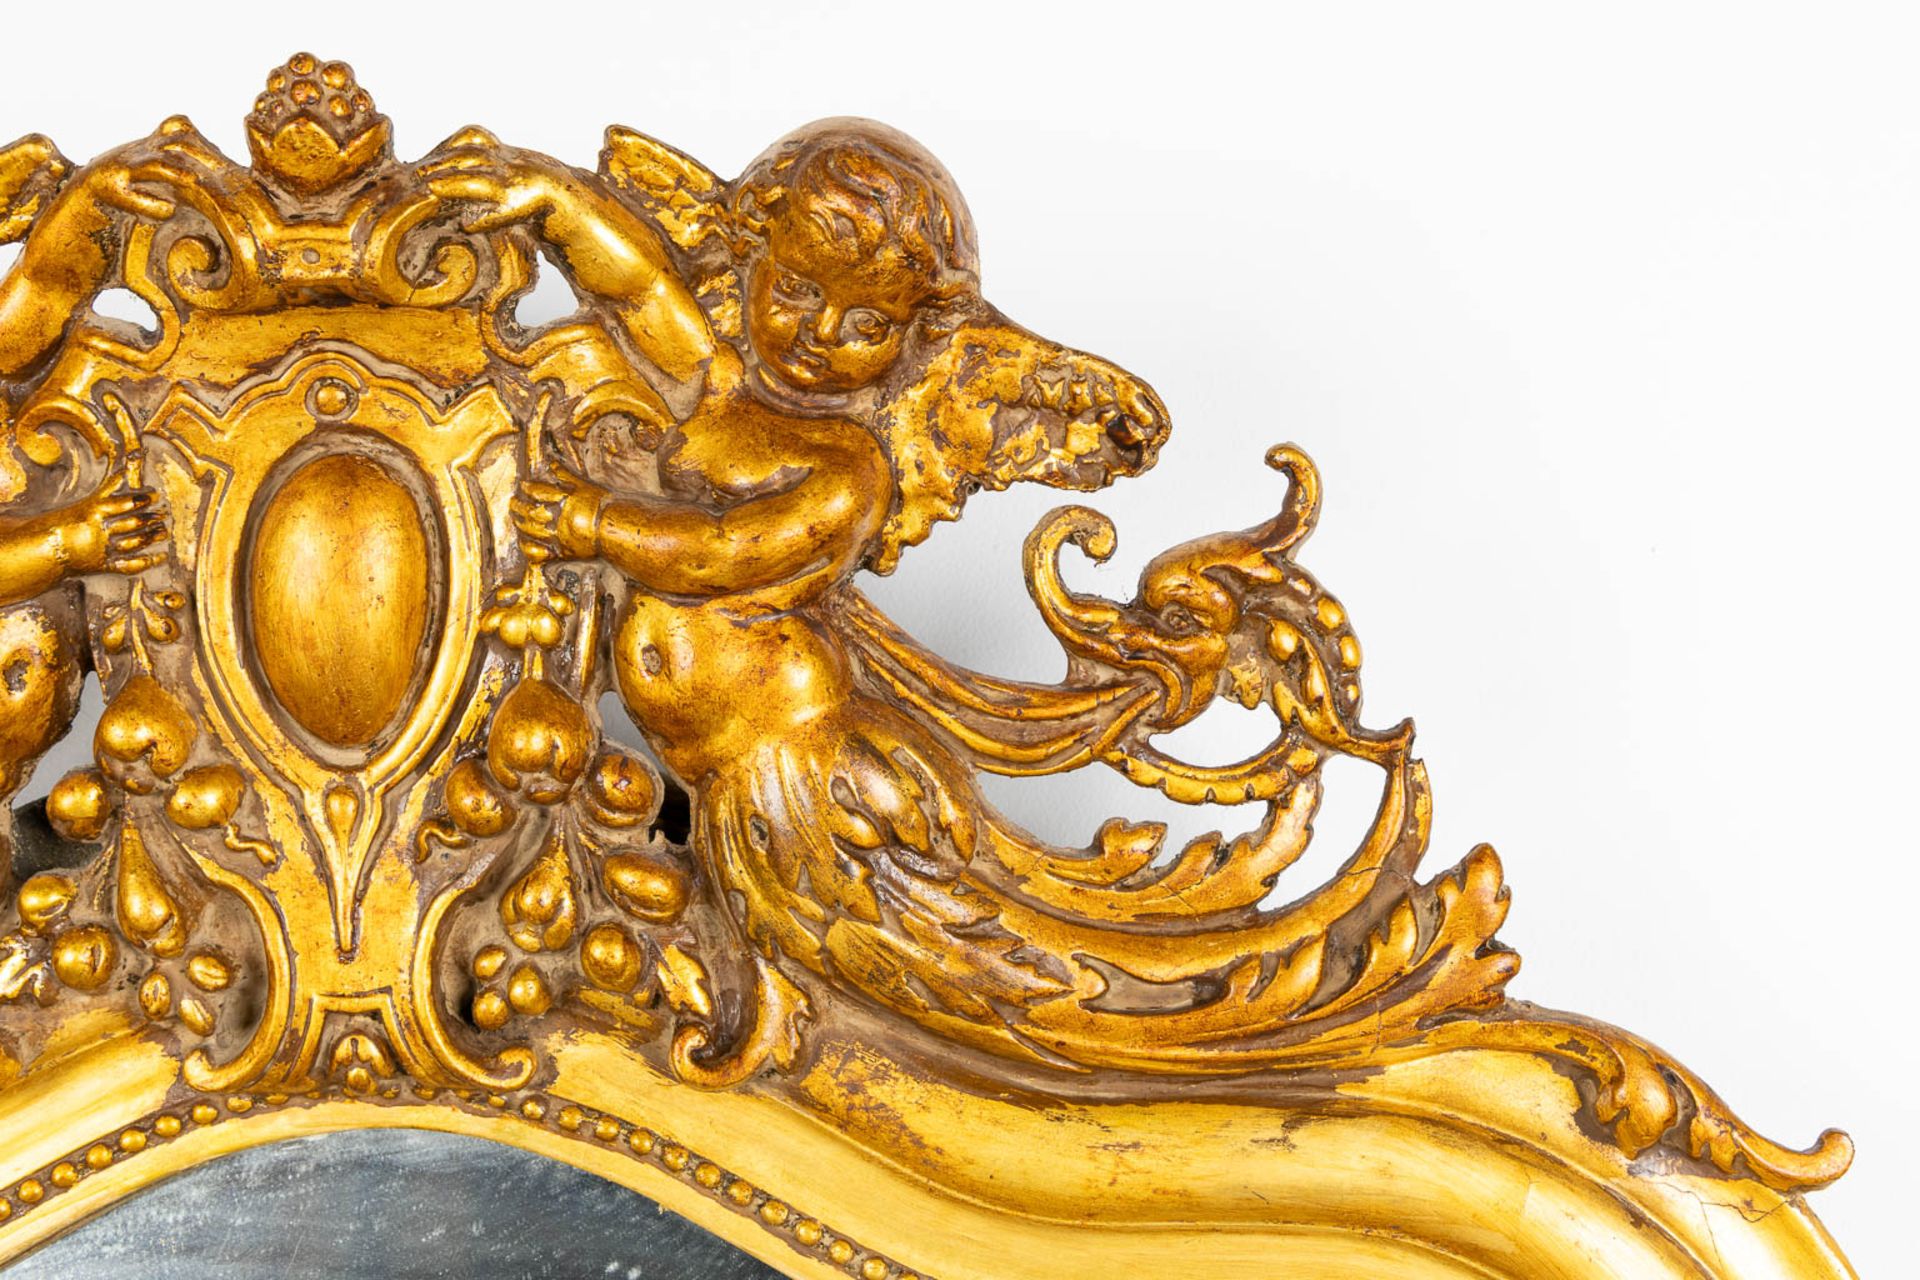 An antique mirror, gilt wood and stucco. Circa 1900. (W:82 x H:122 cm) - Image 5 of 11